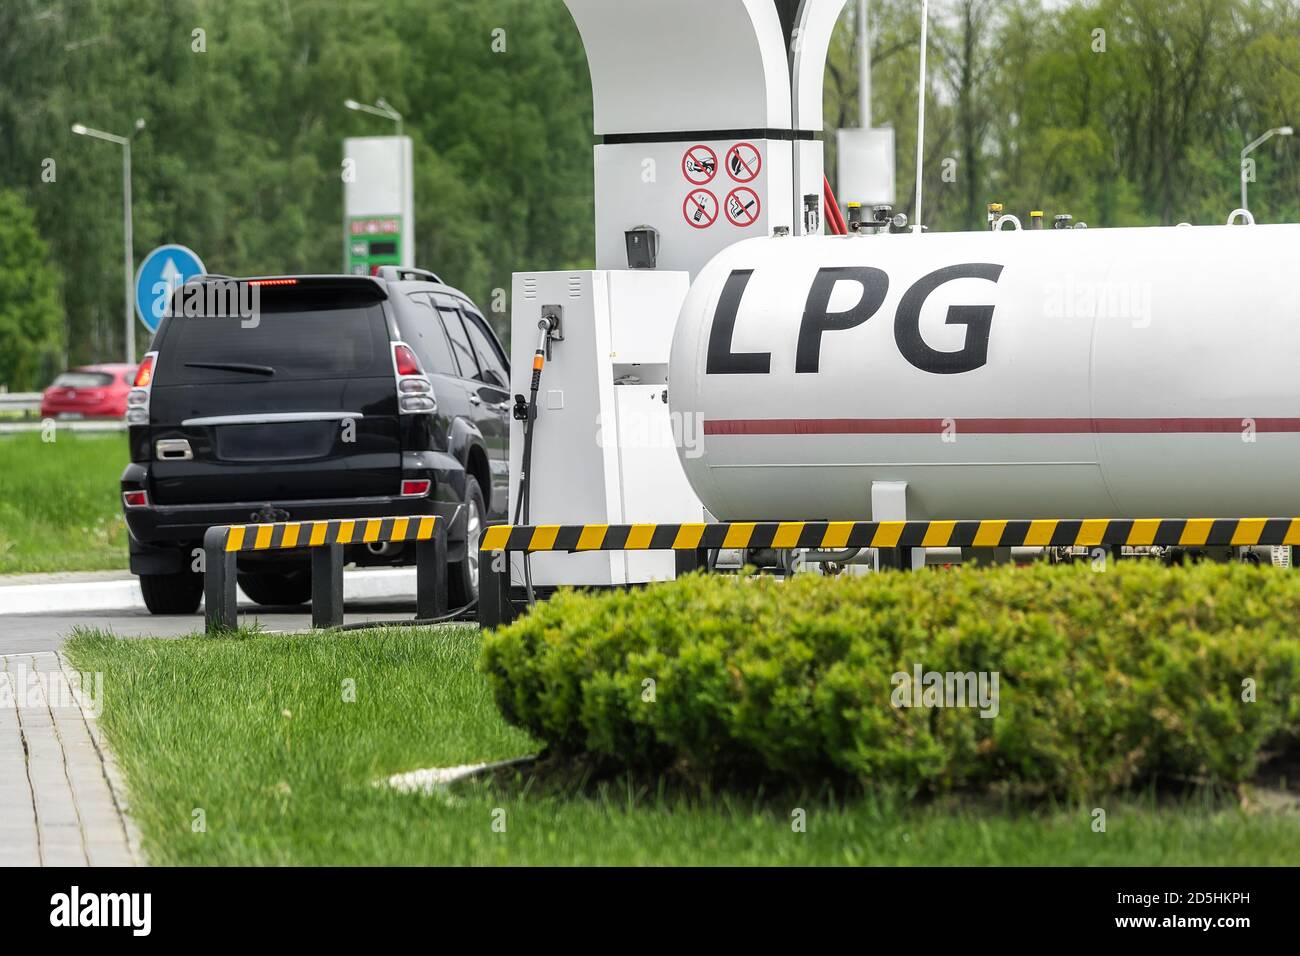 Liquid propane gas station. Black modern SUV car refueling tank with alternative power natural liquefied fuel Stock Photo